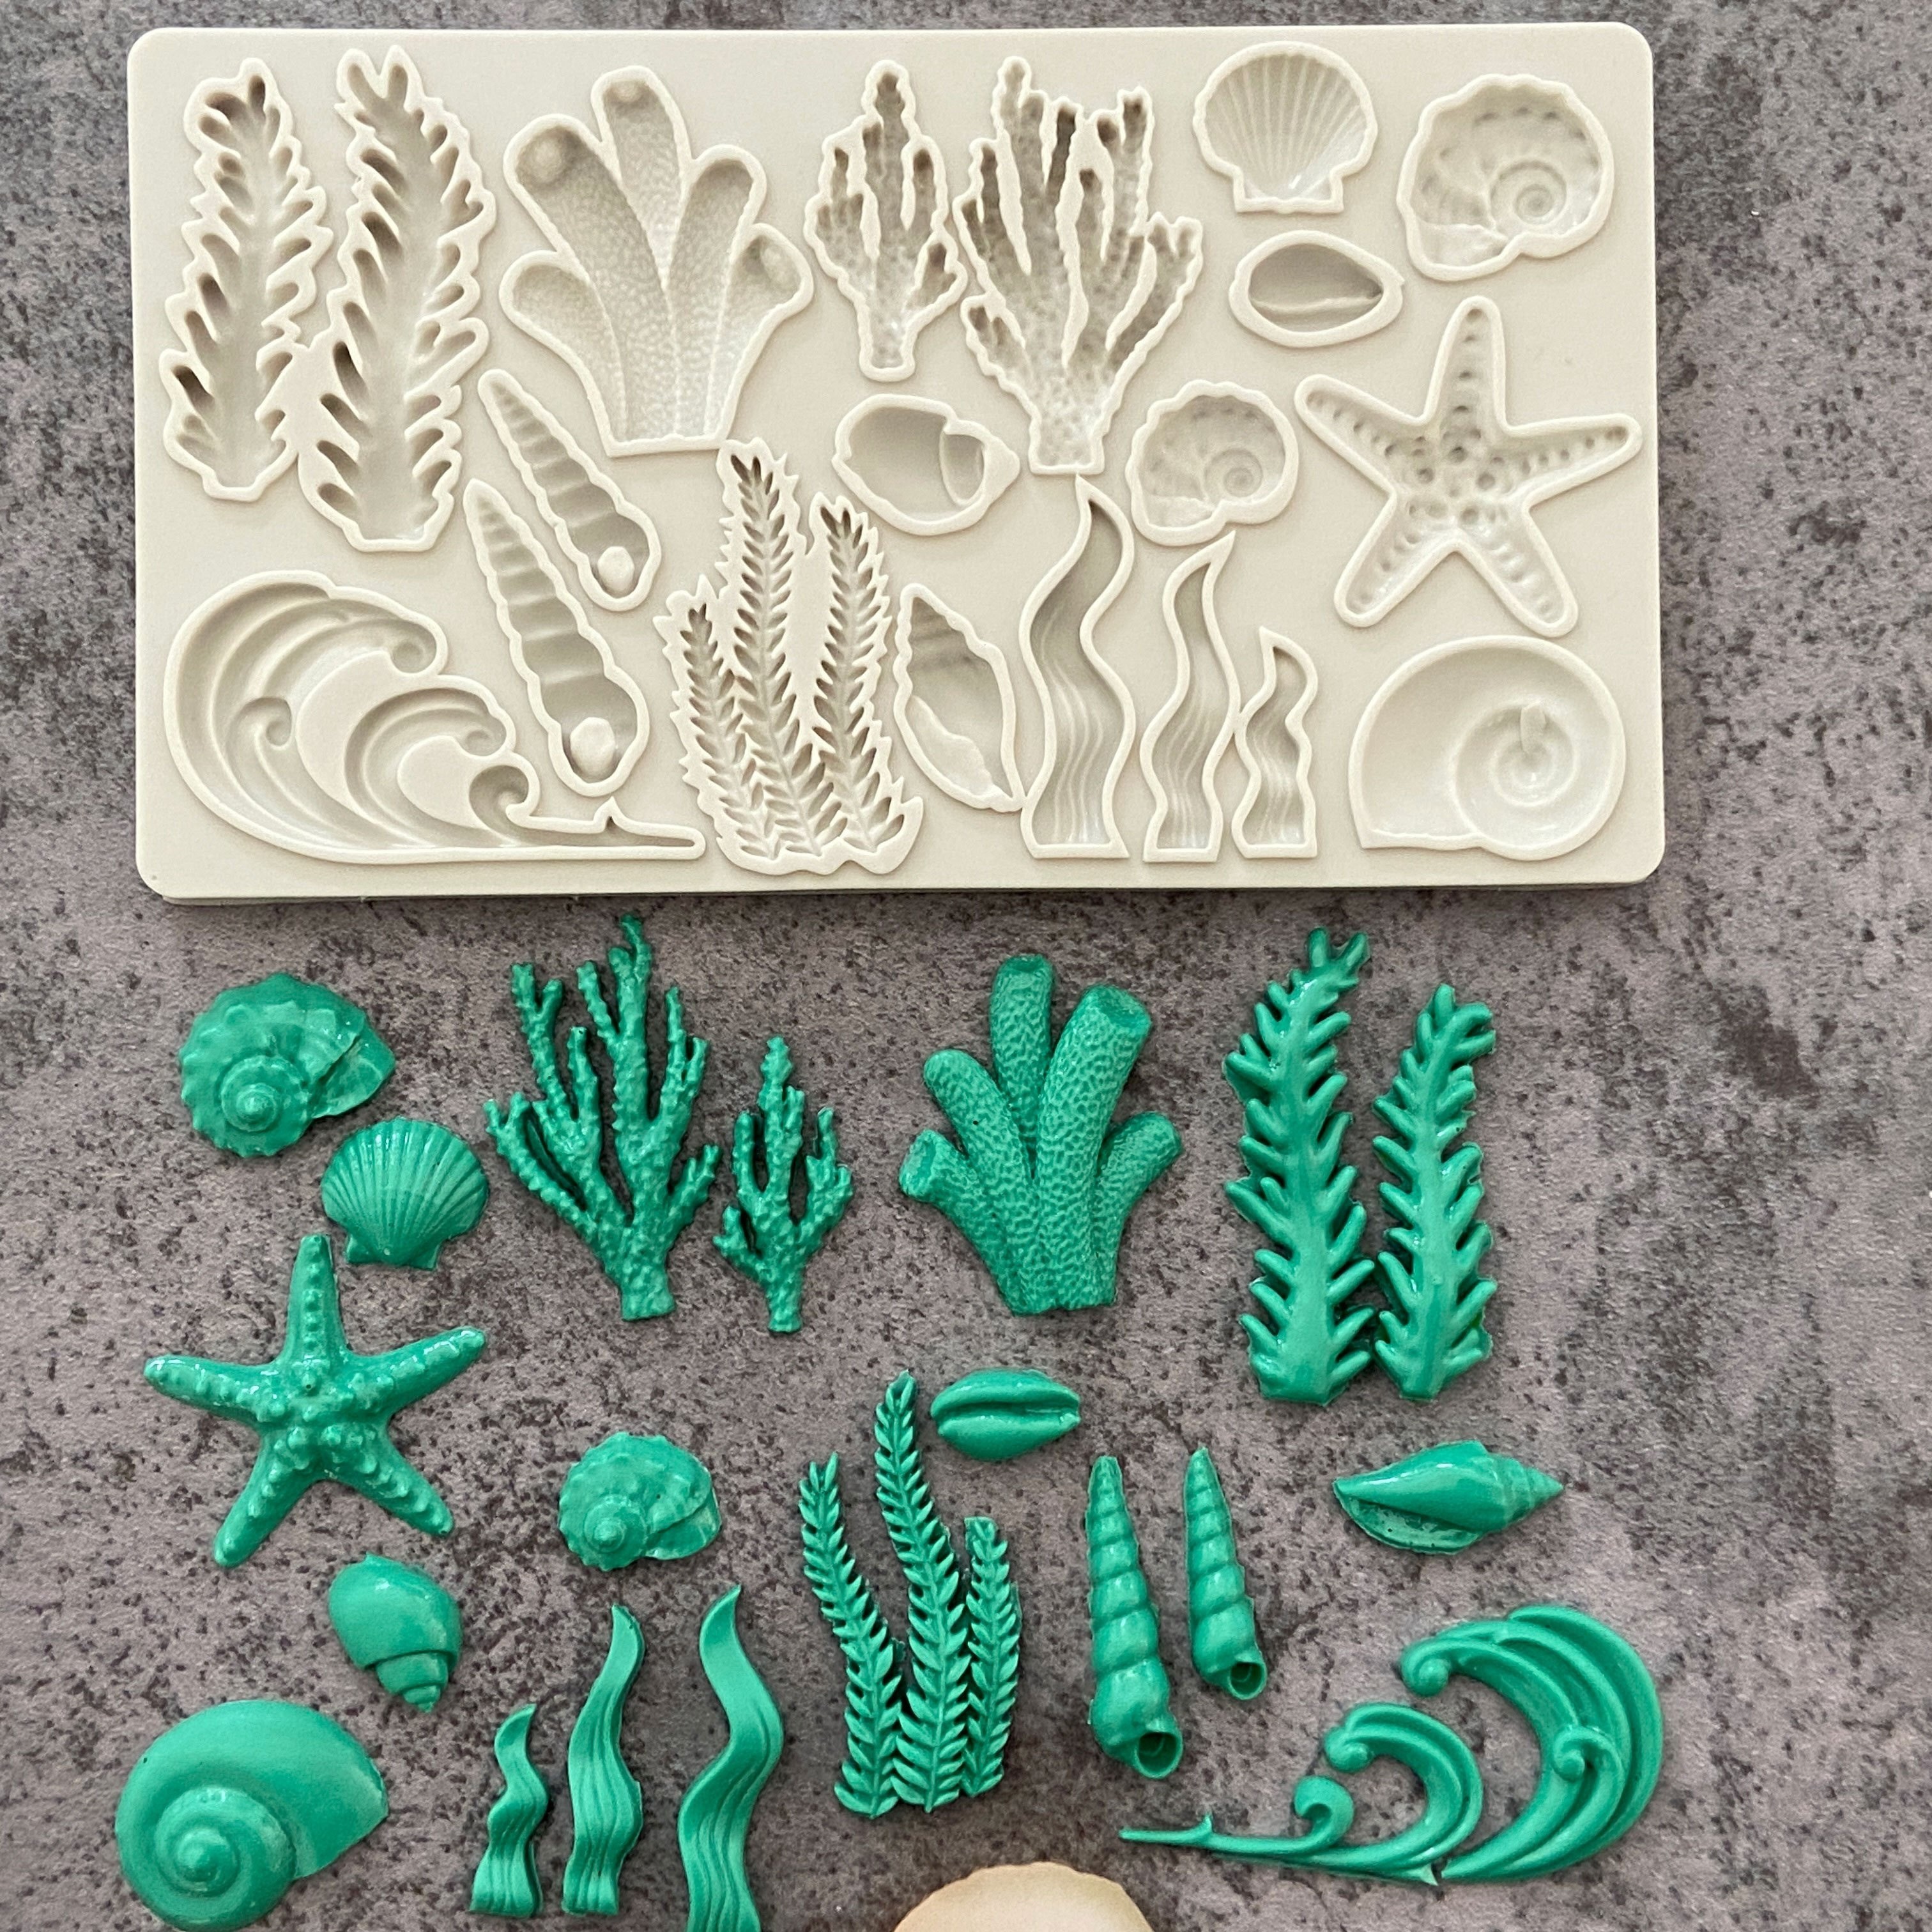 

Ocean-inspired Silicone Mold For Cake Decorating - Starfish & Seaweed Design, Bpa-free Food Grade, Non-stick, Easy Release - Perfect For Fondant, Chocolate, And Sugar Crafts